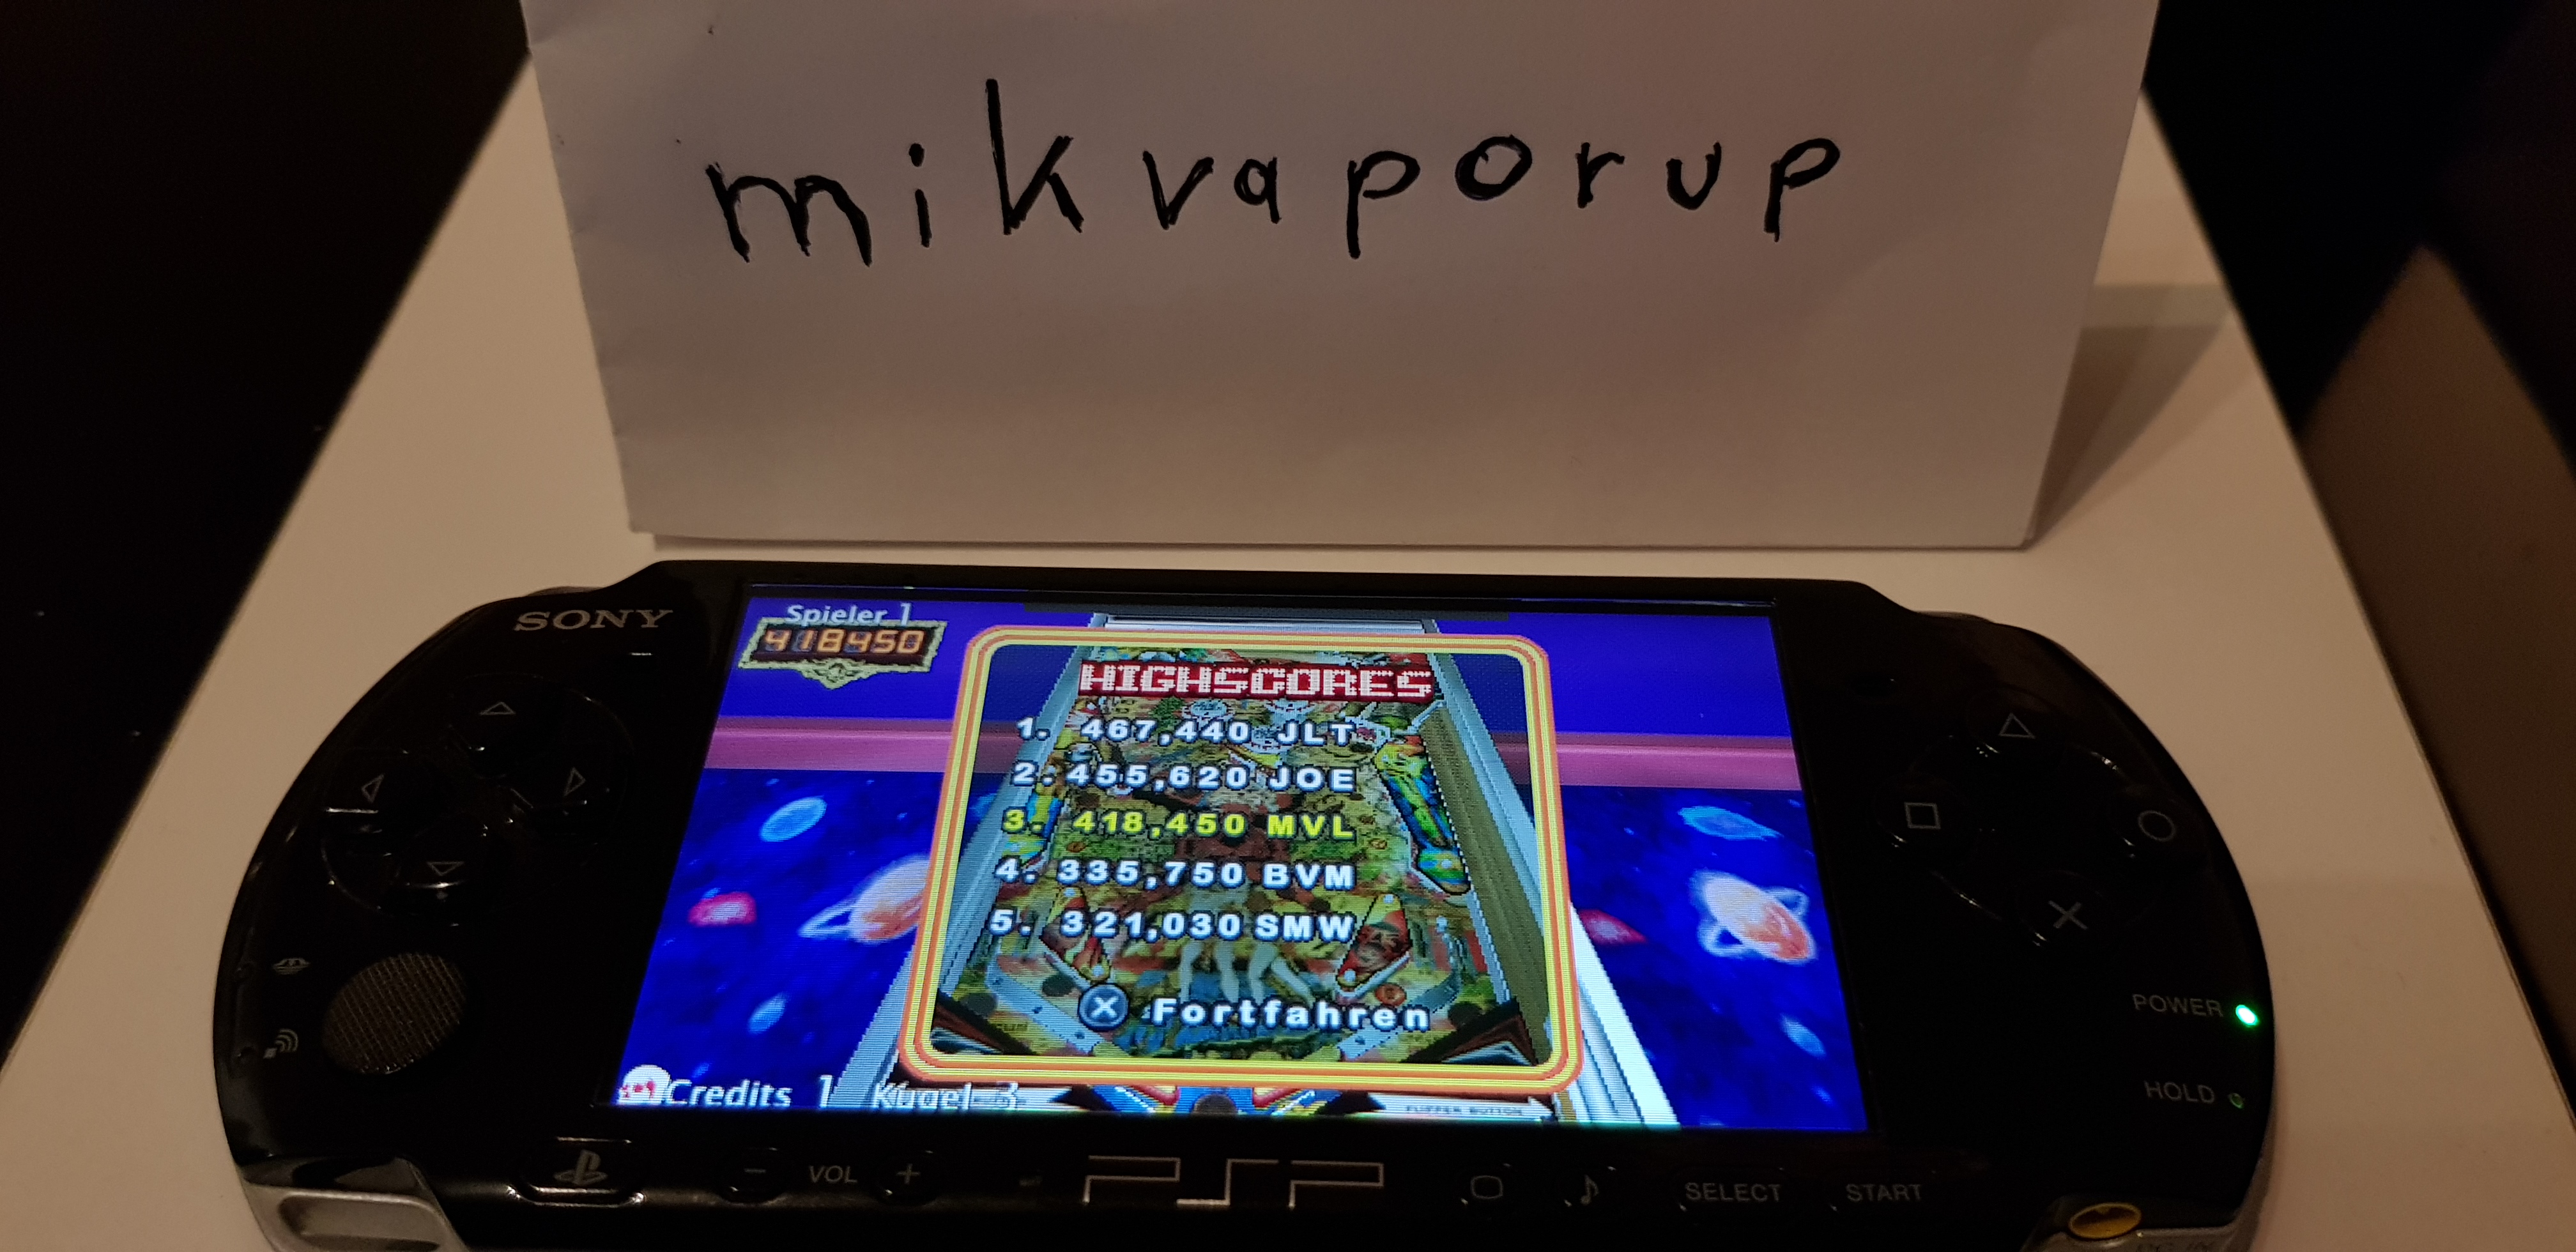 mikvaporup: Pinball Hall Of Fame: The Williams Collection: Gorgar (PSP) 418,450 points on 2019-09-30 13:22:25